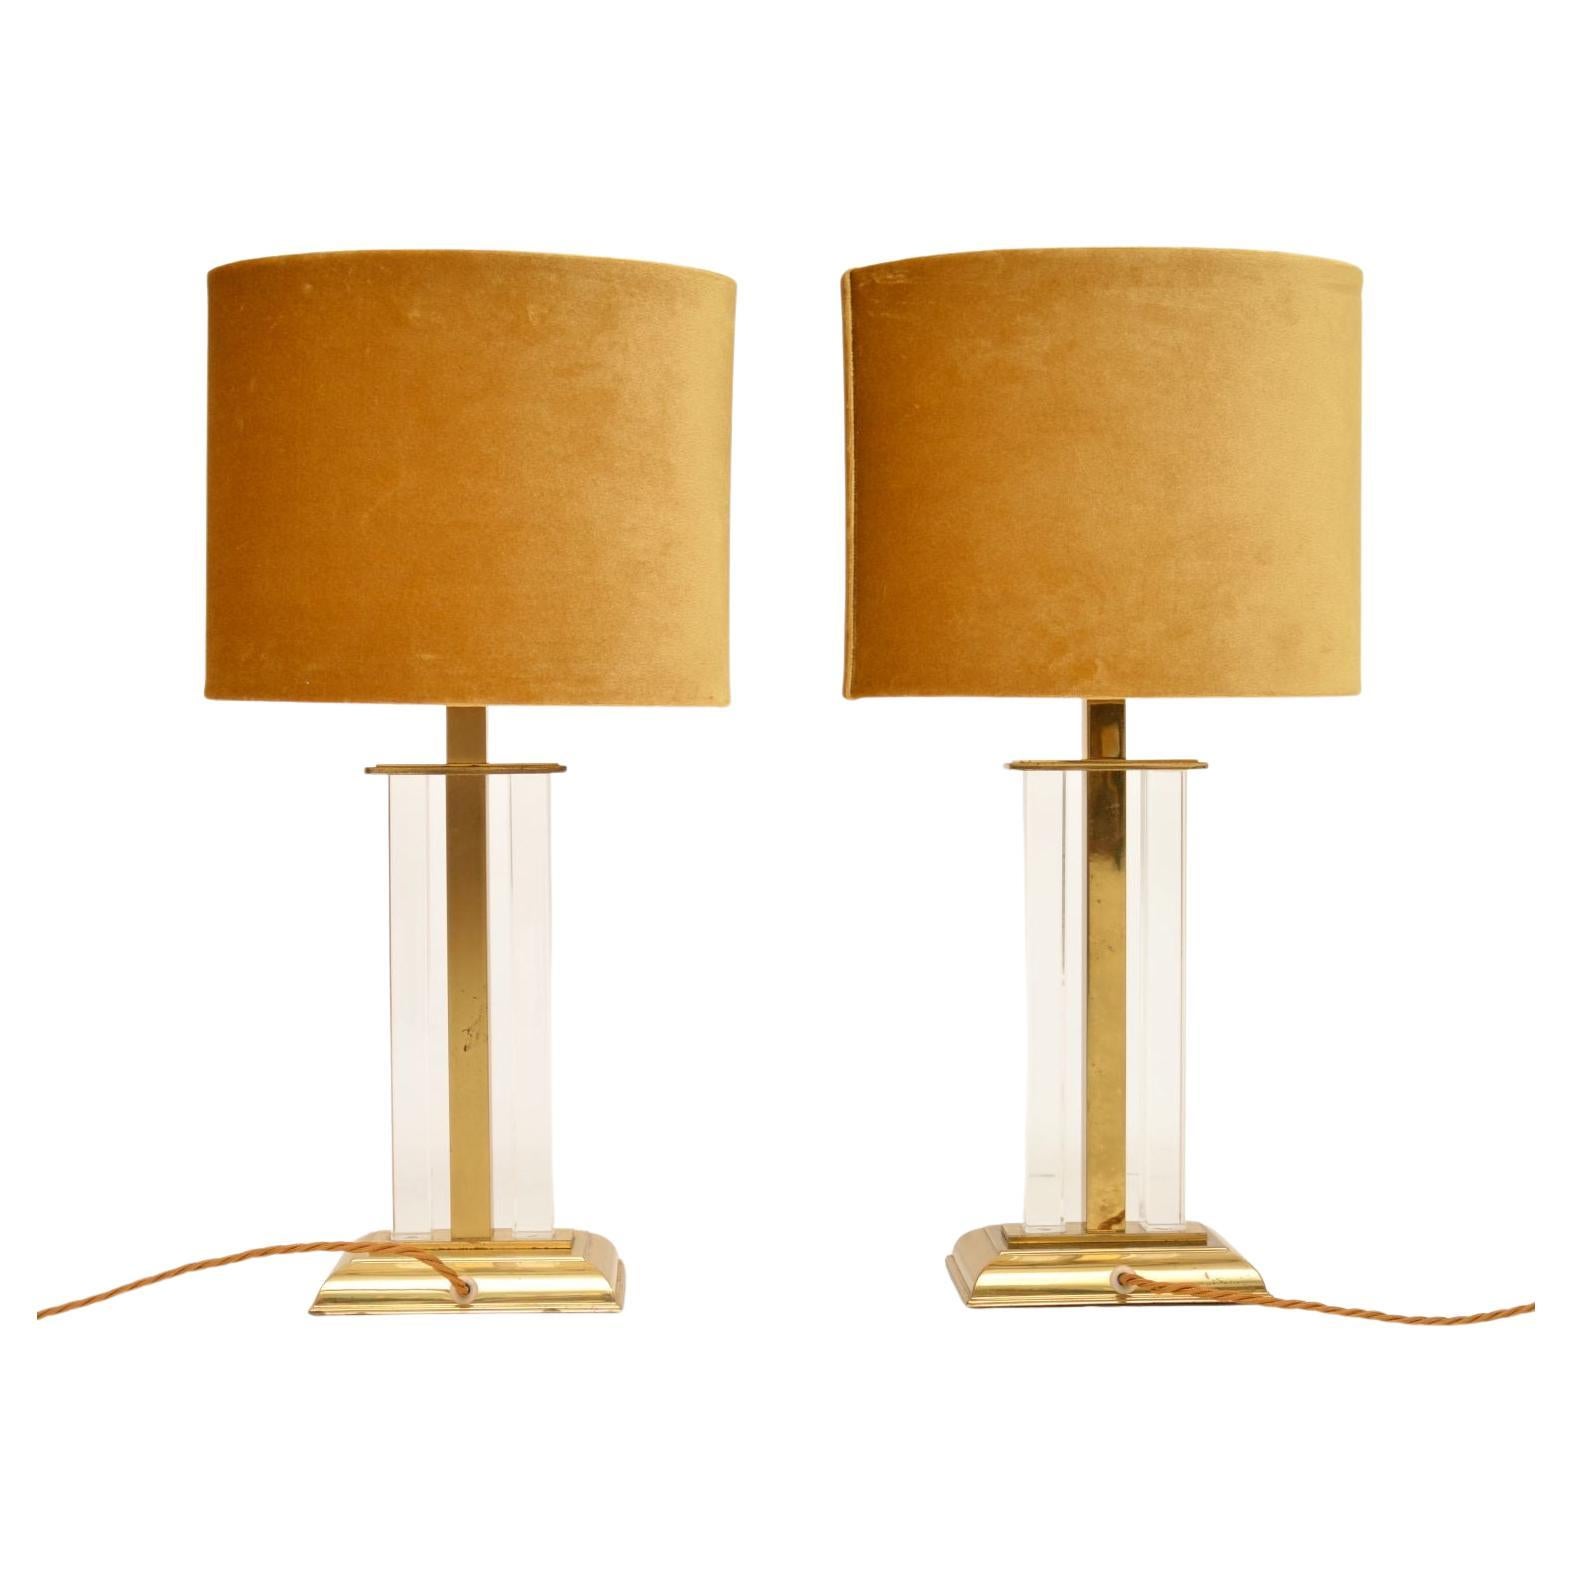 1970's Pair of Vintage Brass & Lucite Table Lamps